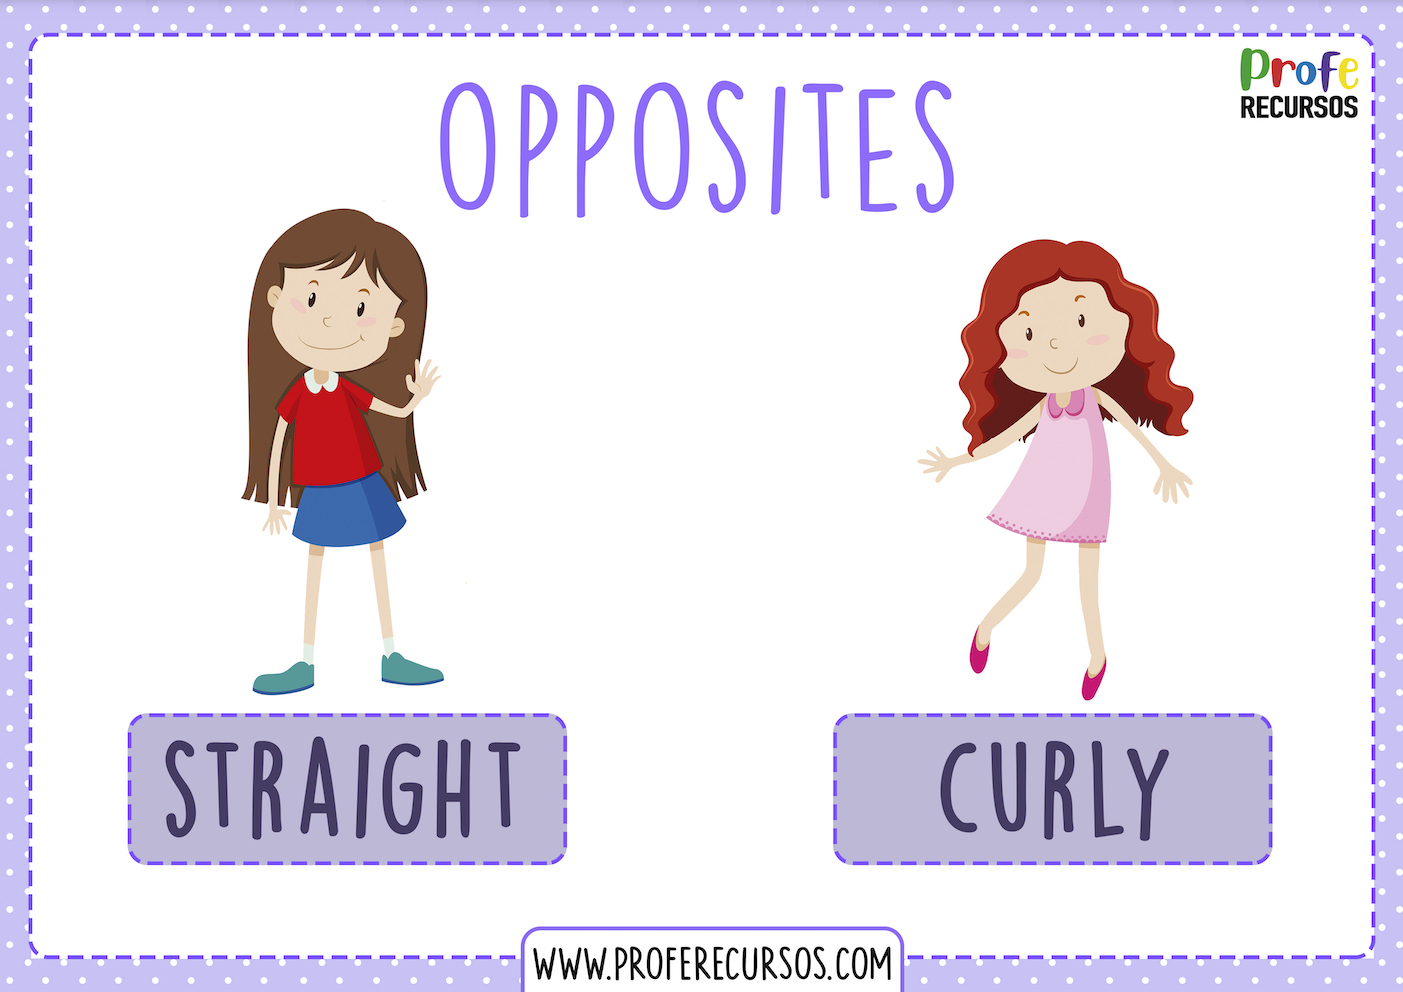 English opposites adjectives